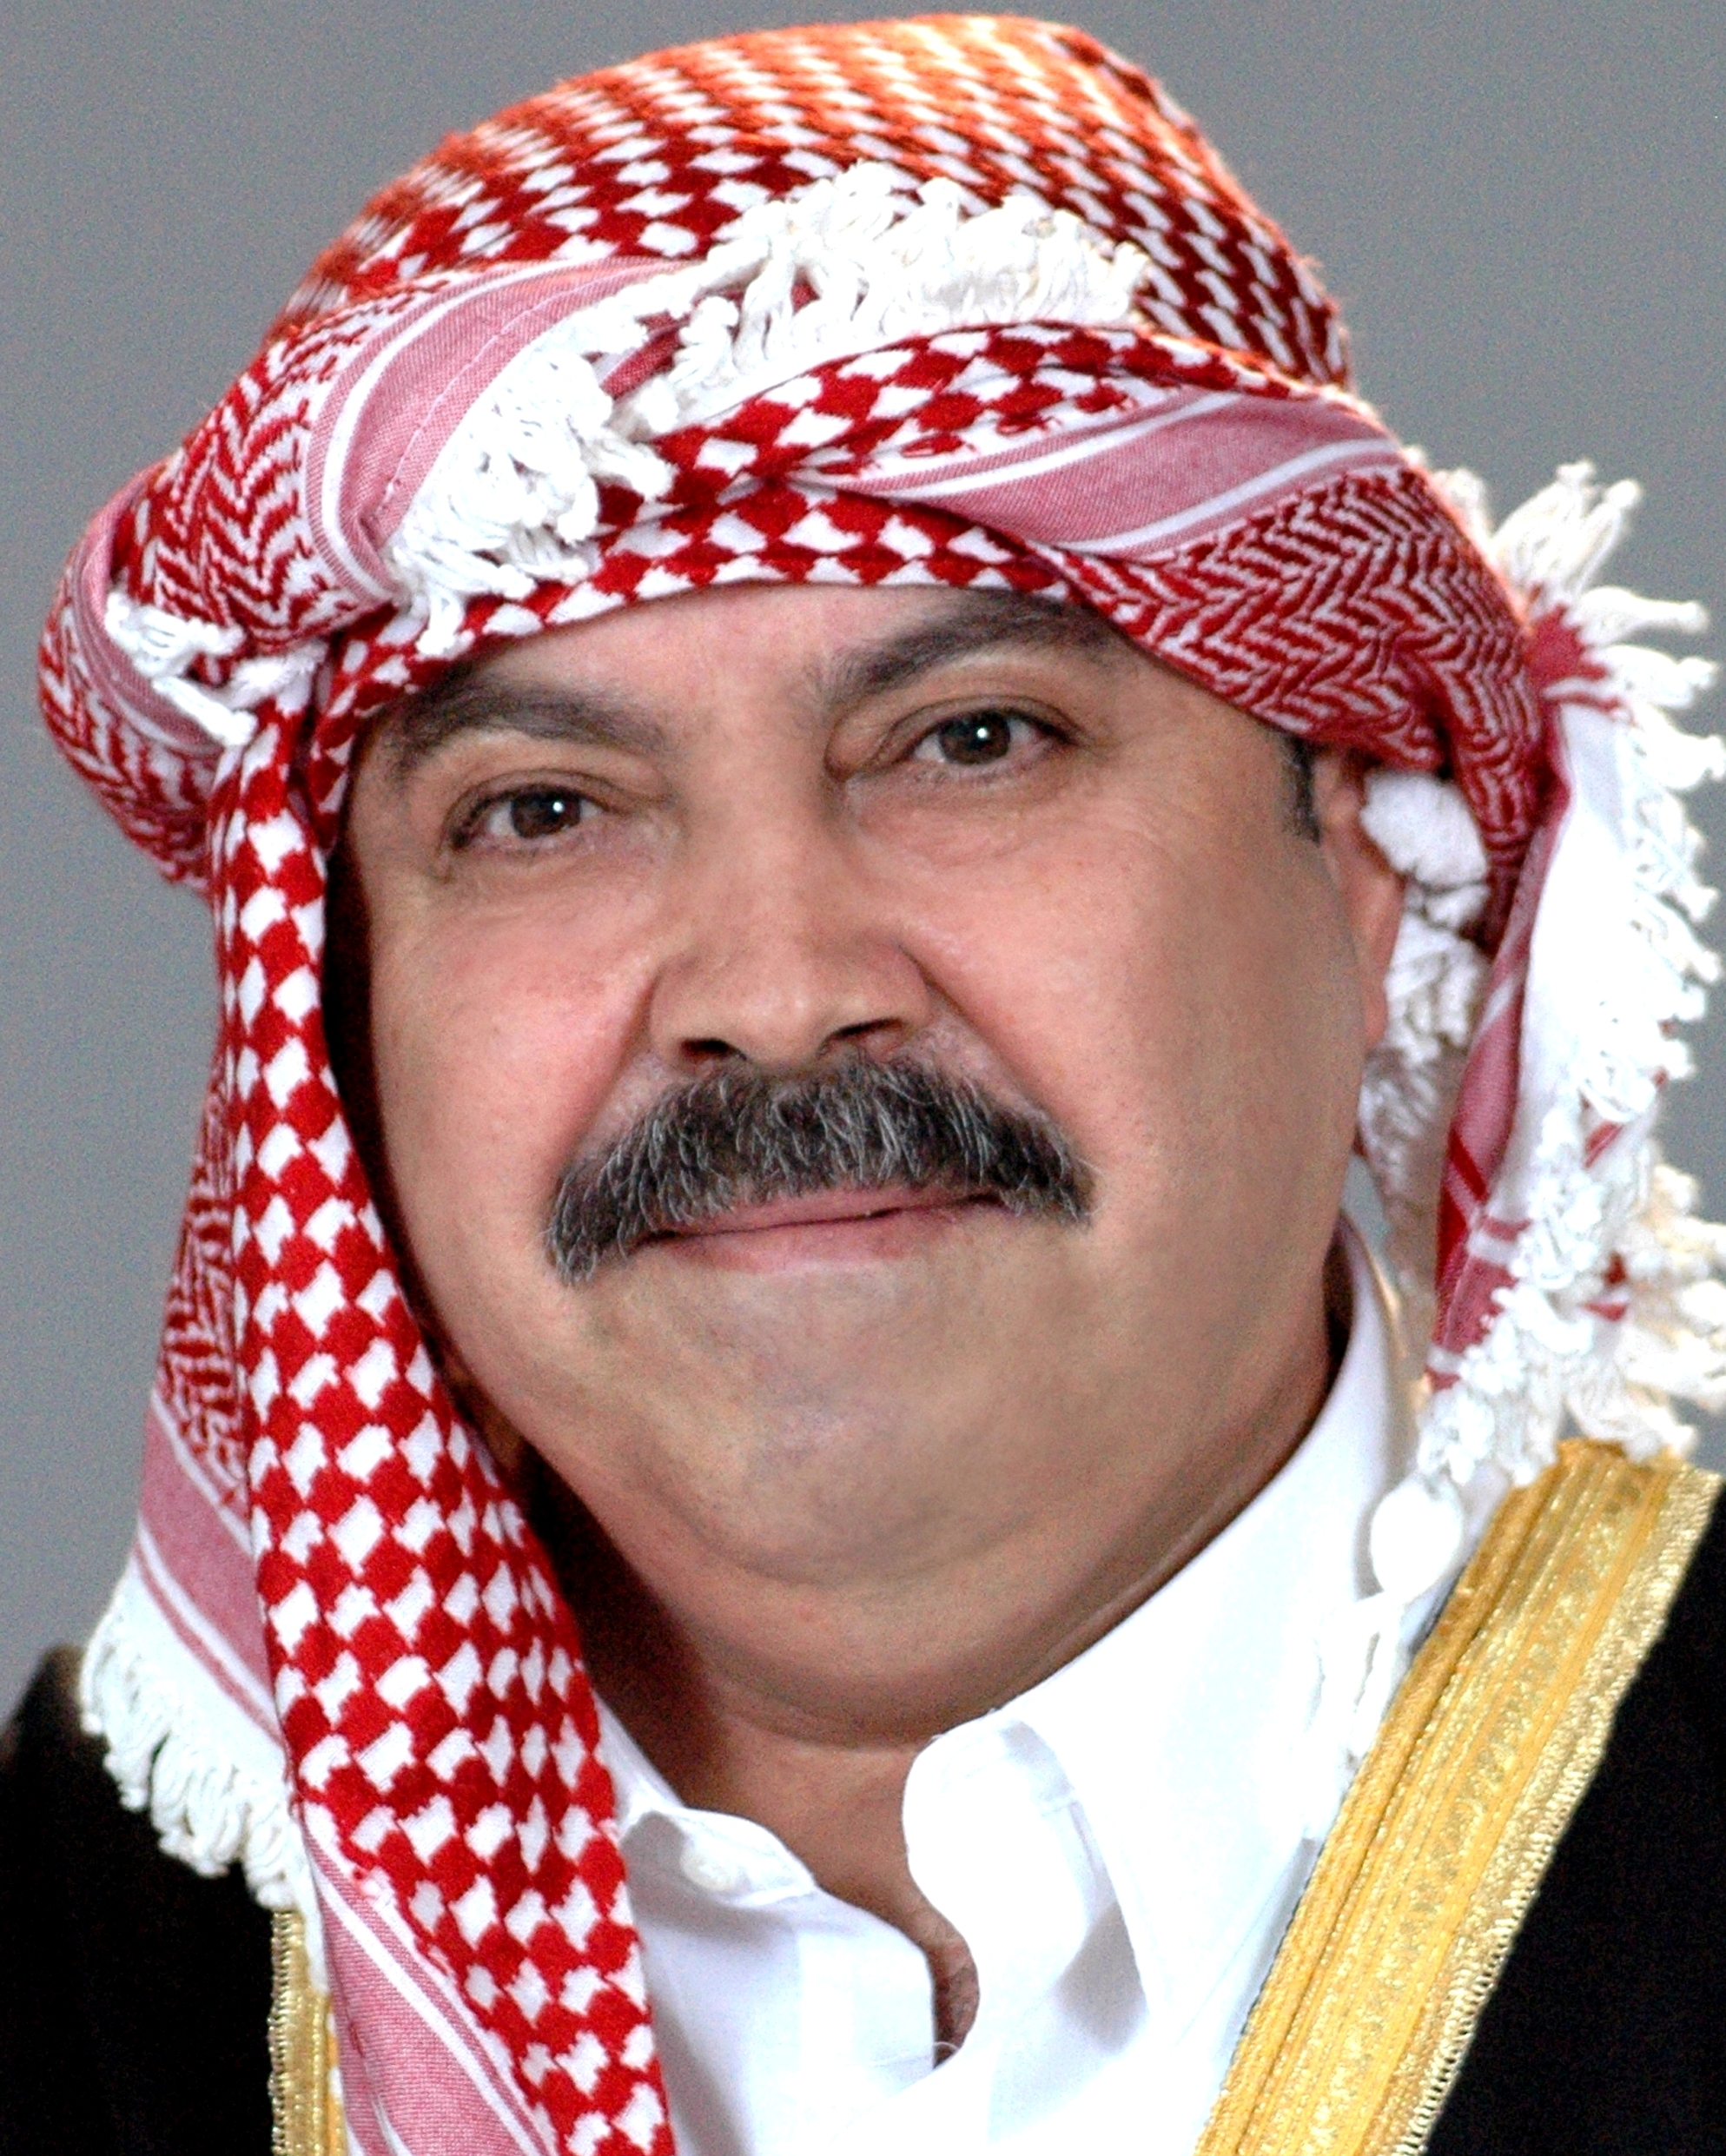 Zuhair Haddad in Iraqi outfit.